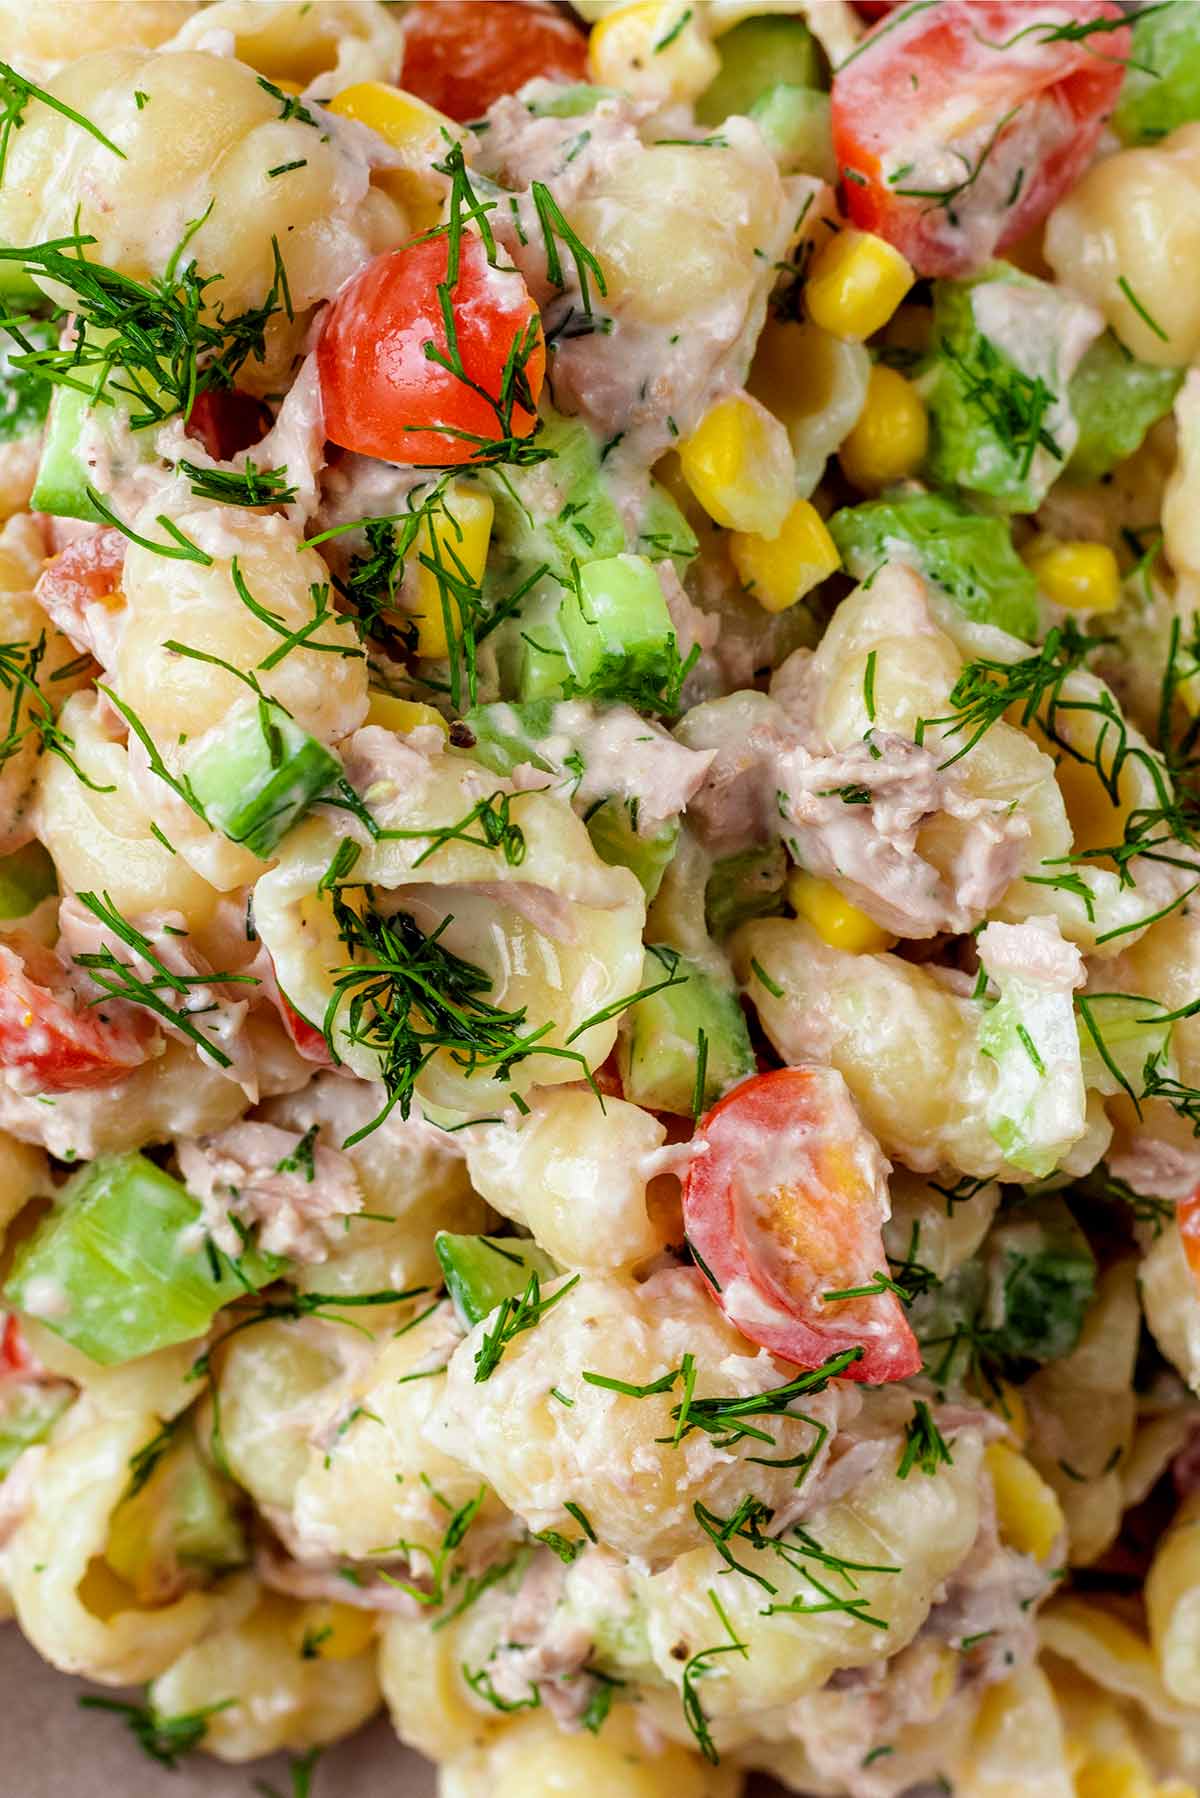 Cooked, pasta, tuna chunks, chopped vegetables and dill in a creamy sauce.